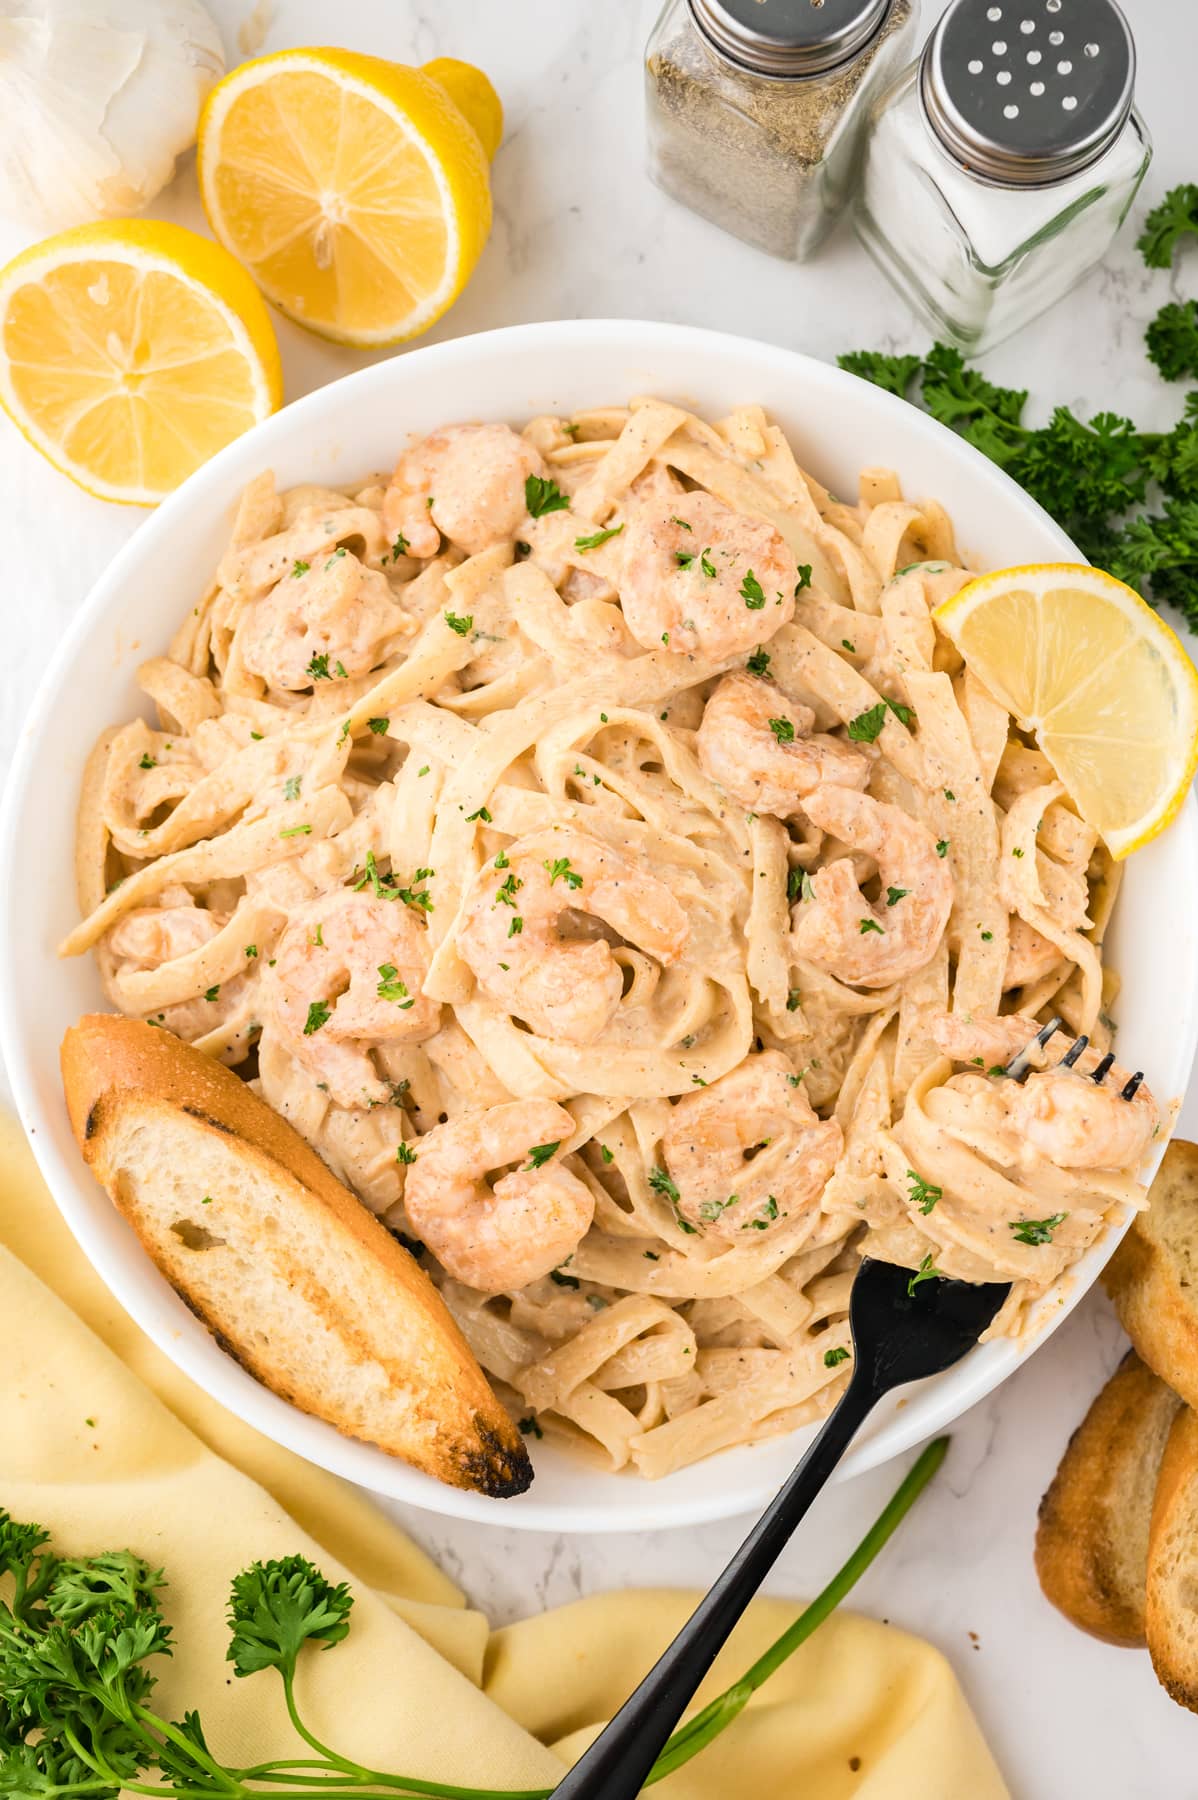 Overhead view of a bowl of creamy shrimp pasta with a piece of garlic bread